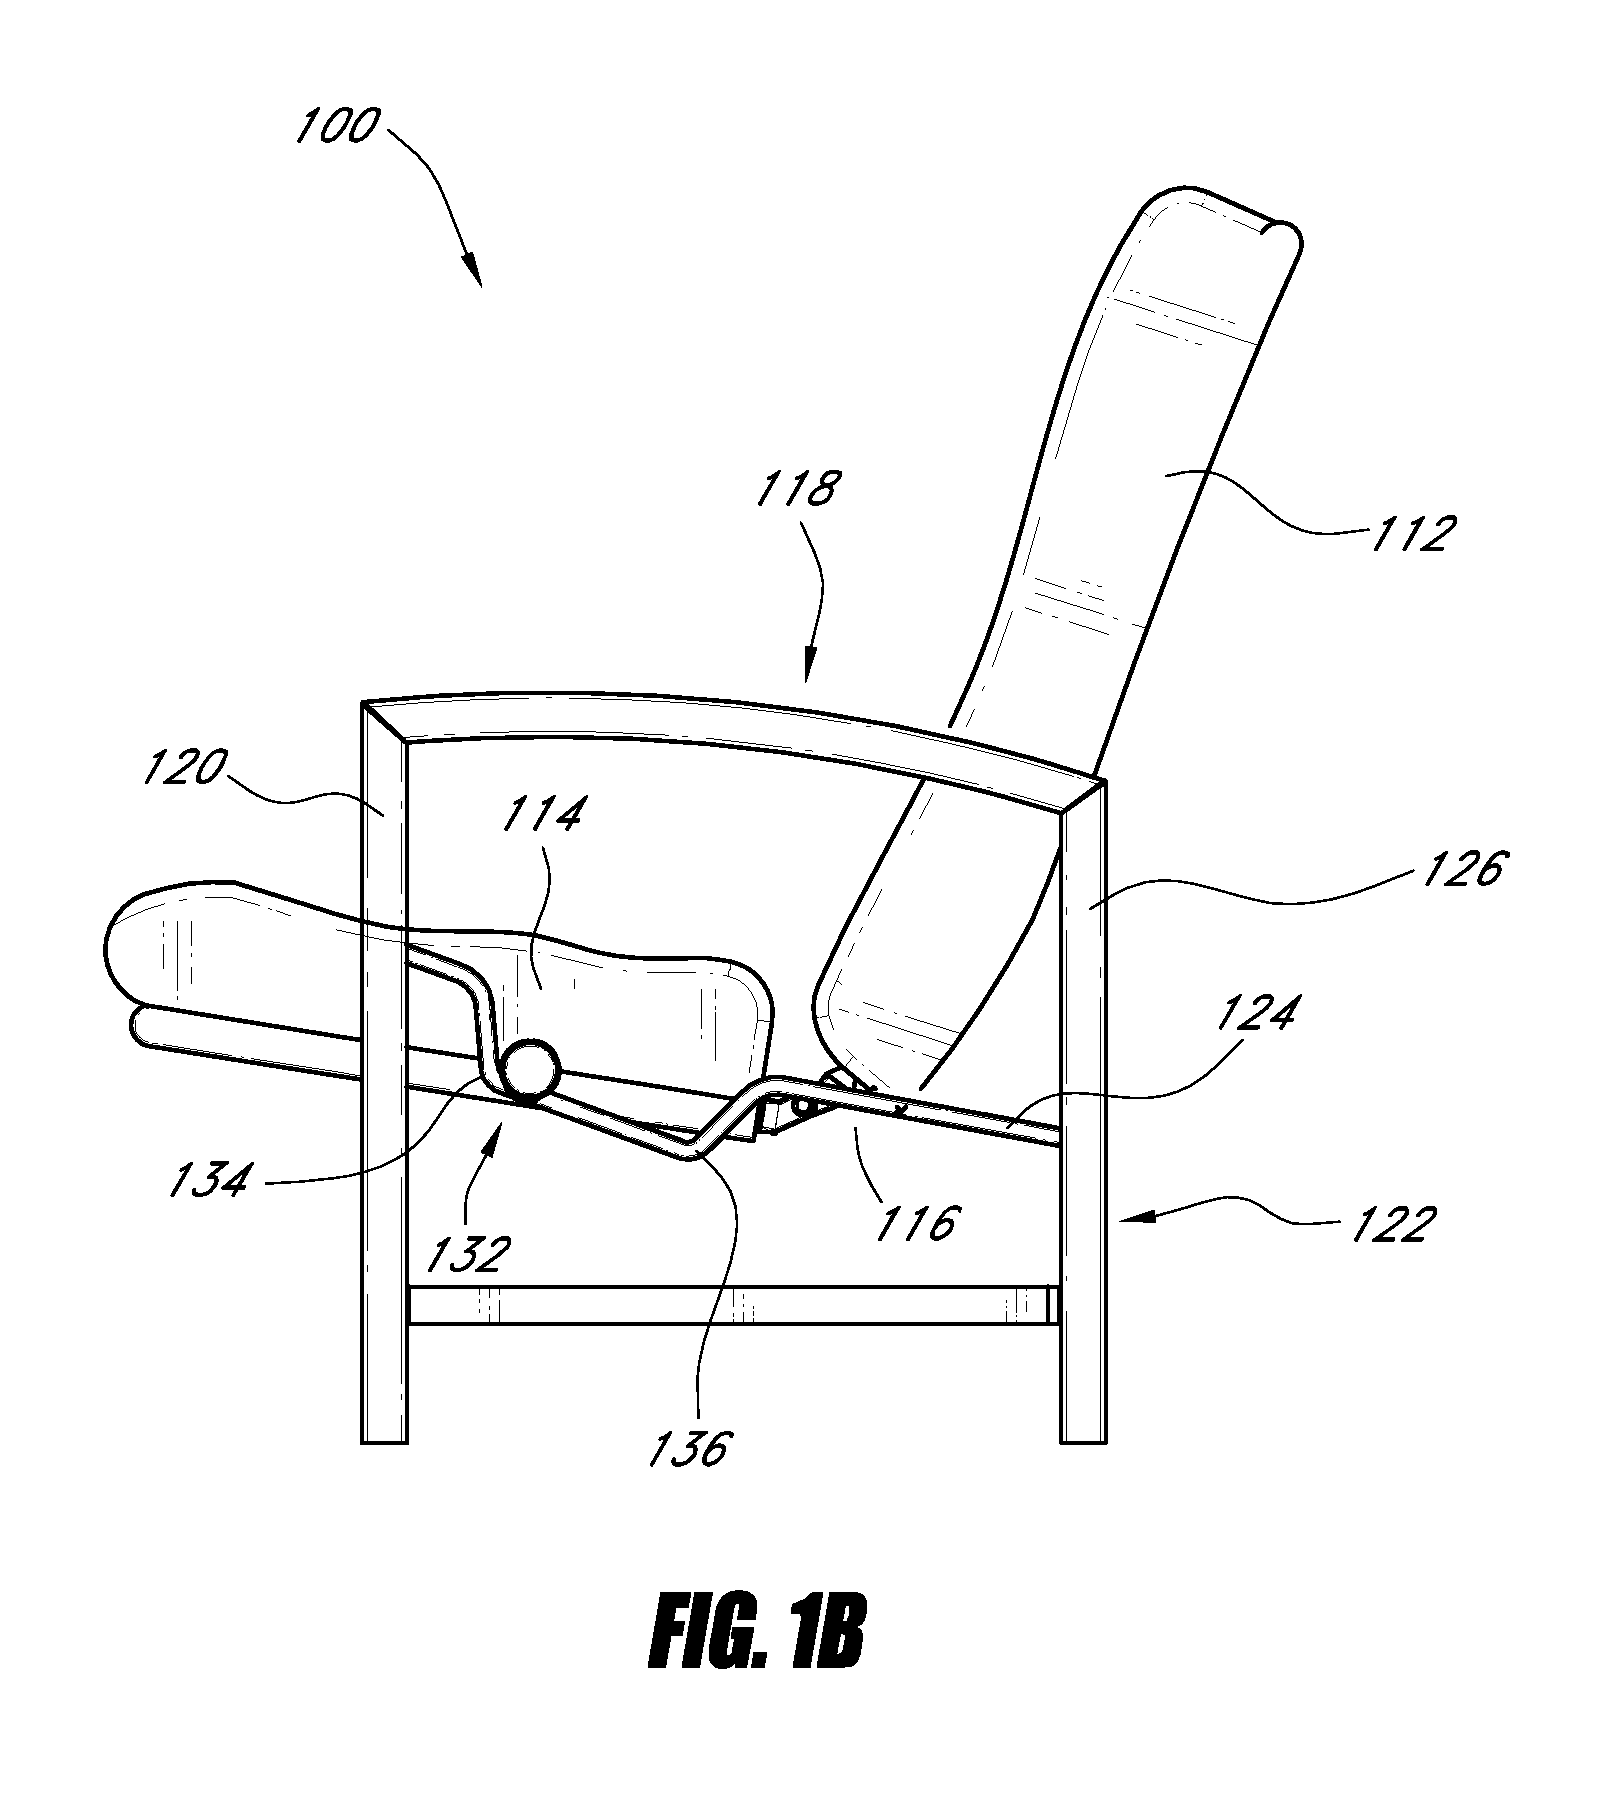 Reclinable seating apparatus and method